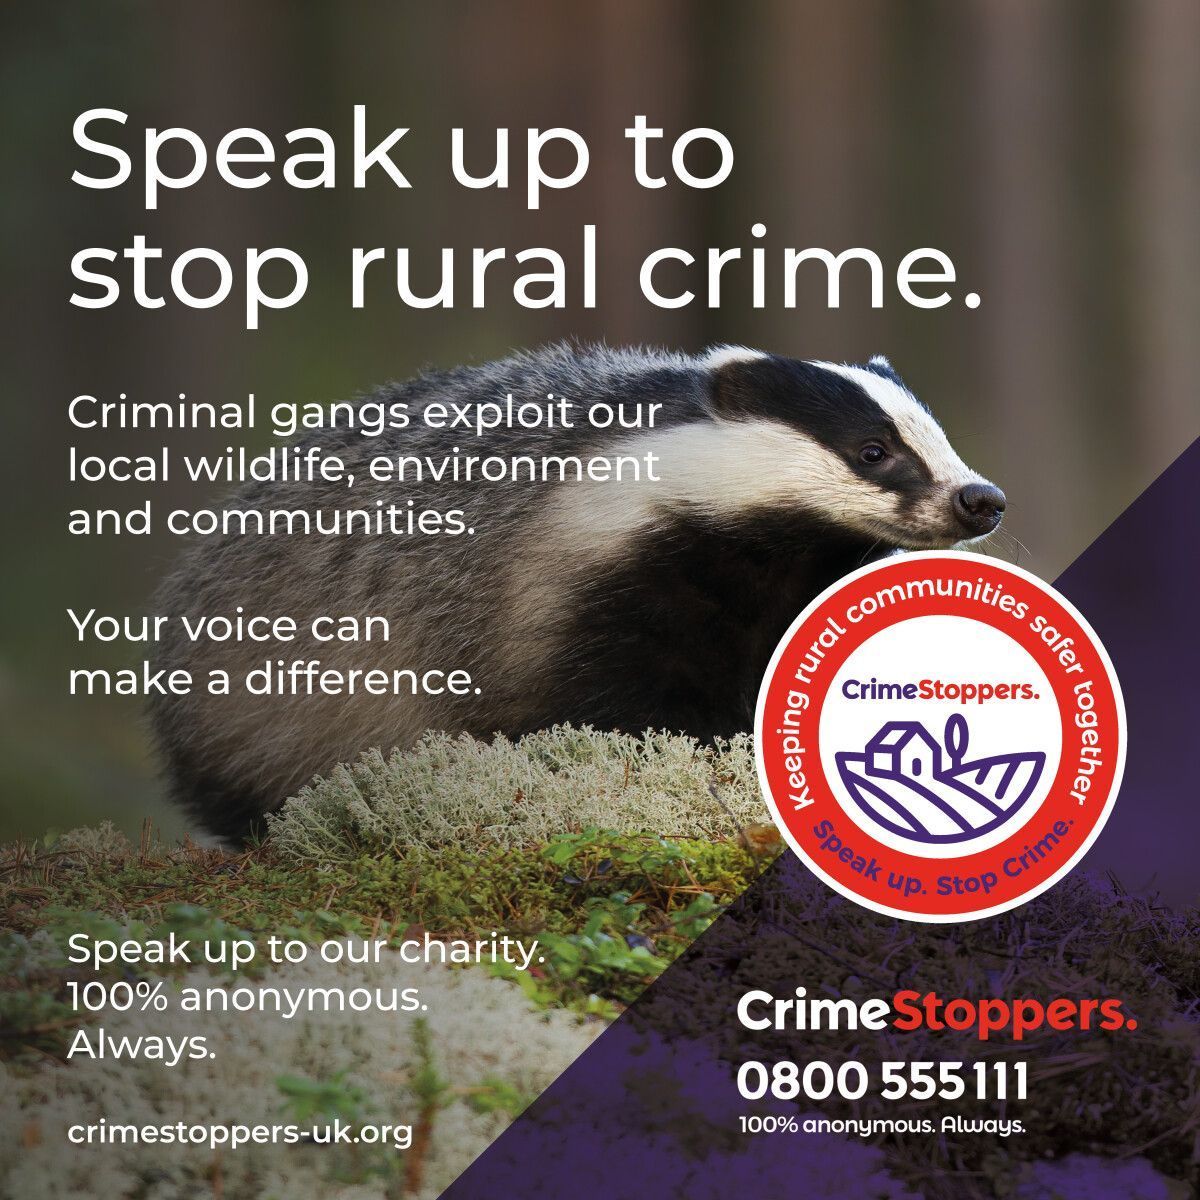 Today marks the International Day of Forests! Did you know that reporting wildlife crimes can protect our precious forests? Be a guardian of nature, report any suspicious activities anonymously to @CrimestoppersUK in Surrey & Sussex. 🌲🔍